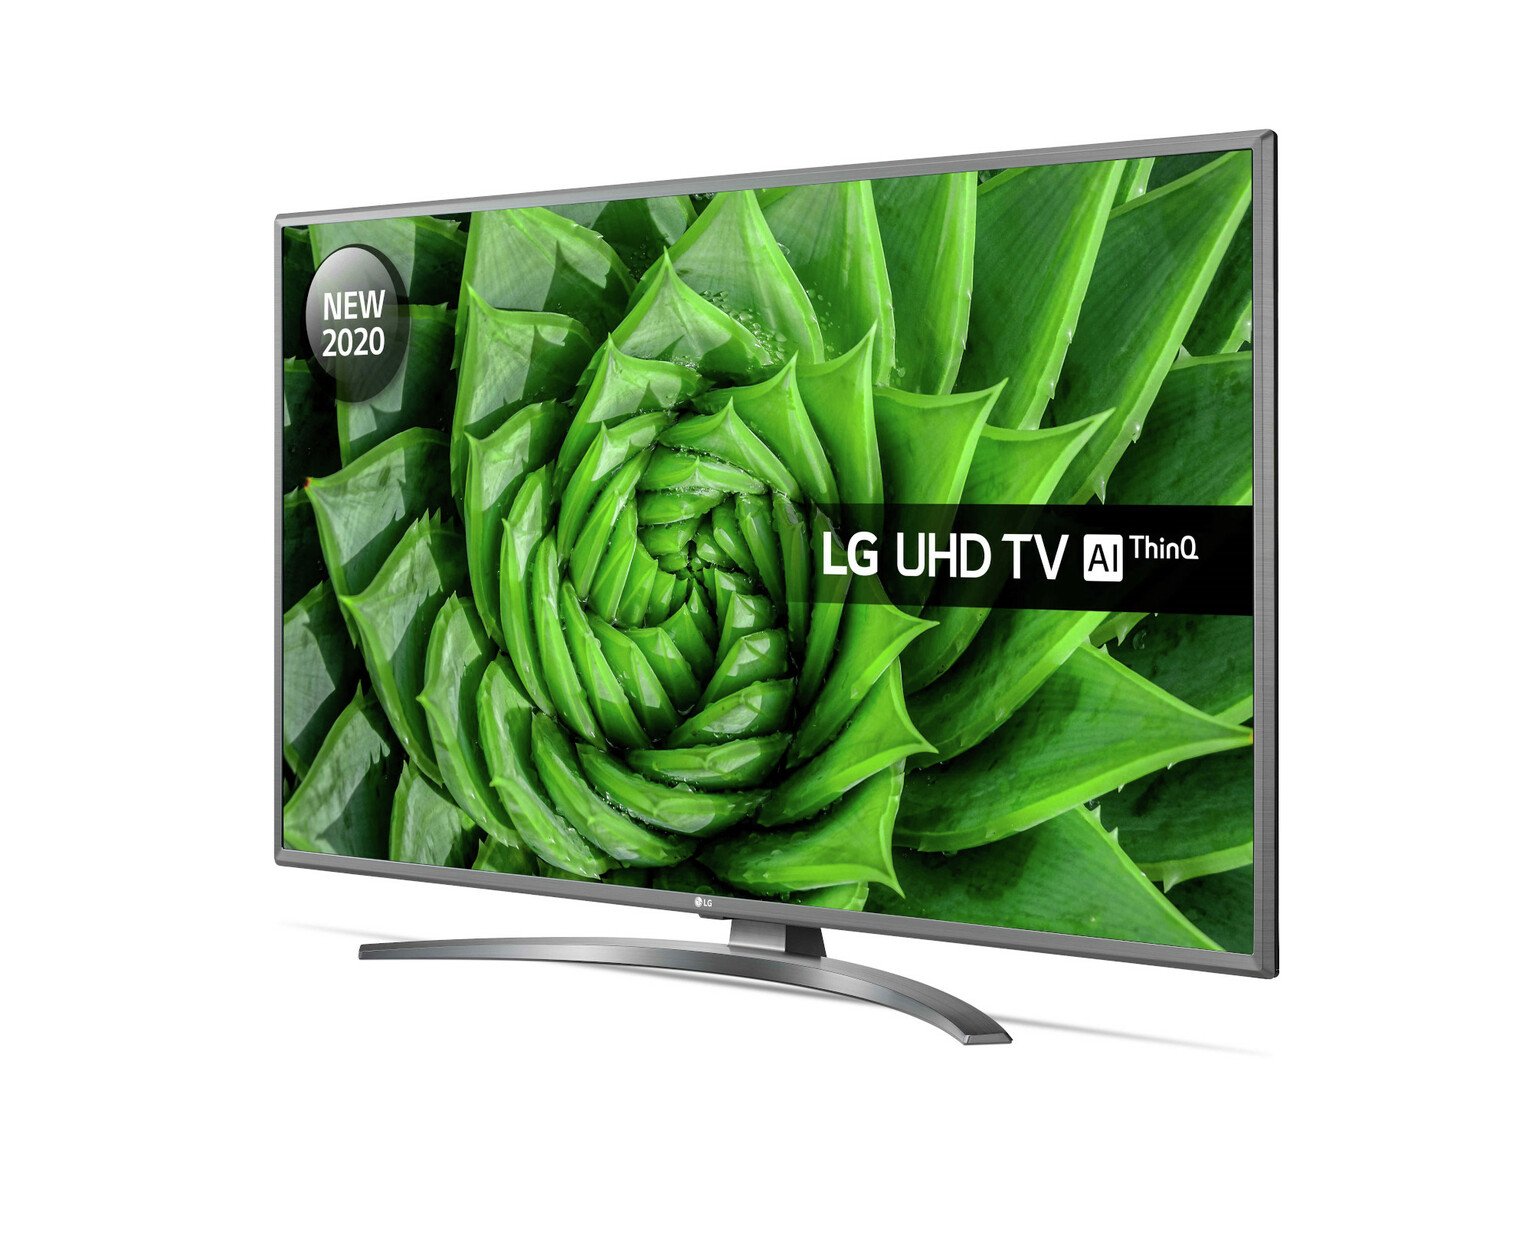 LG 55 Inch 55UN8100 Smart 4K Ultra HD LED TV with HDR Review